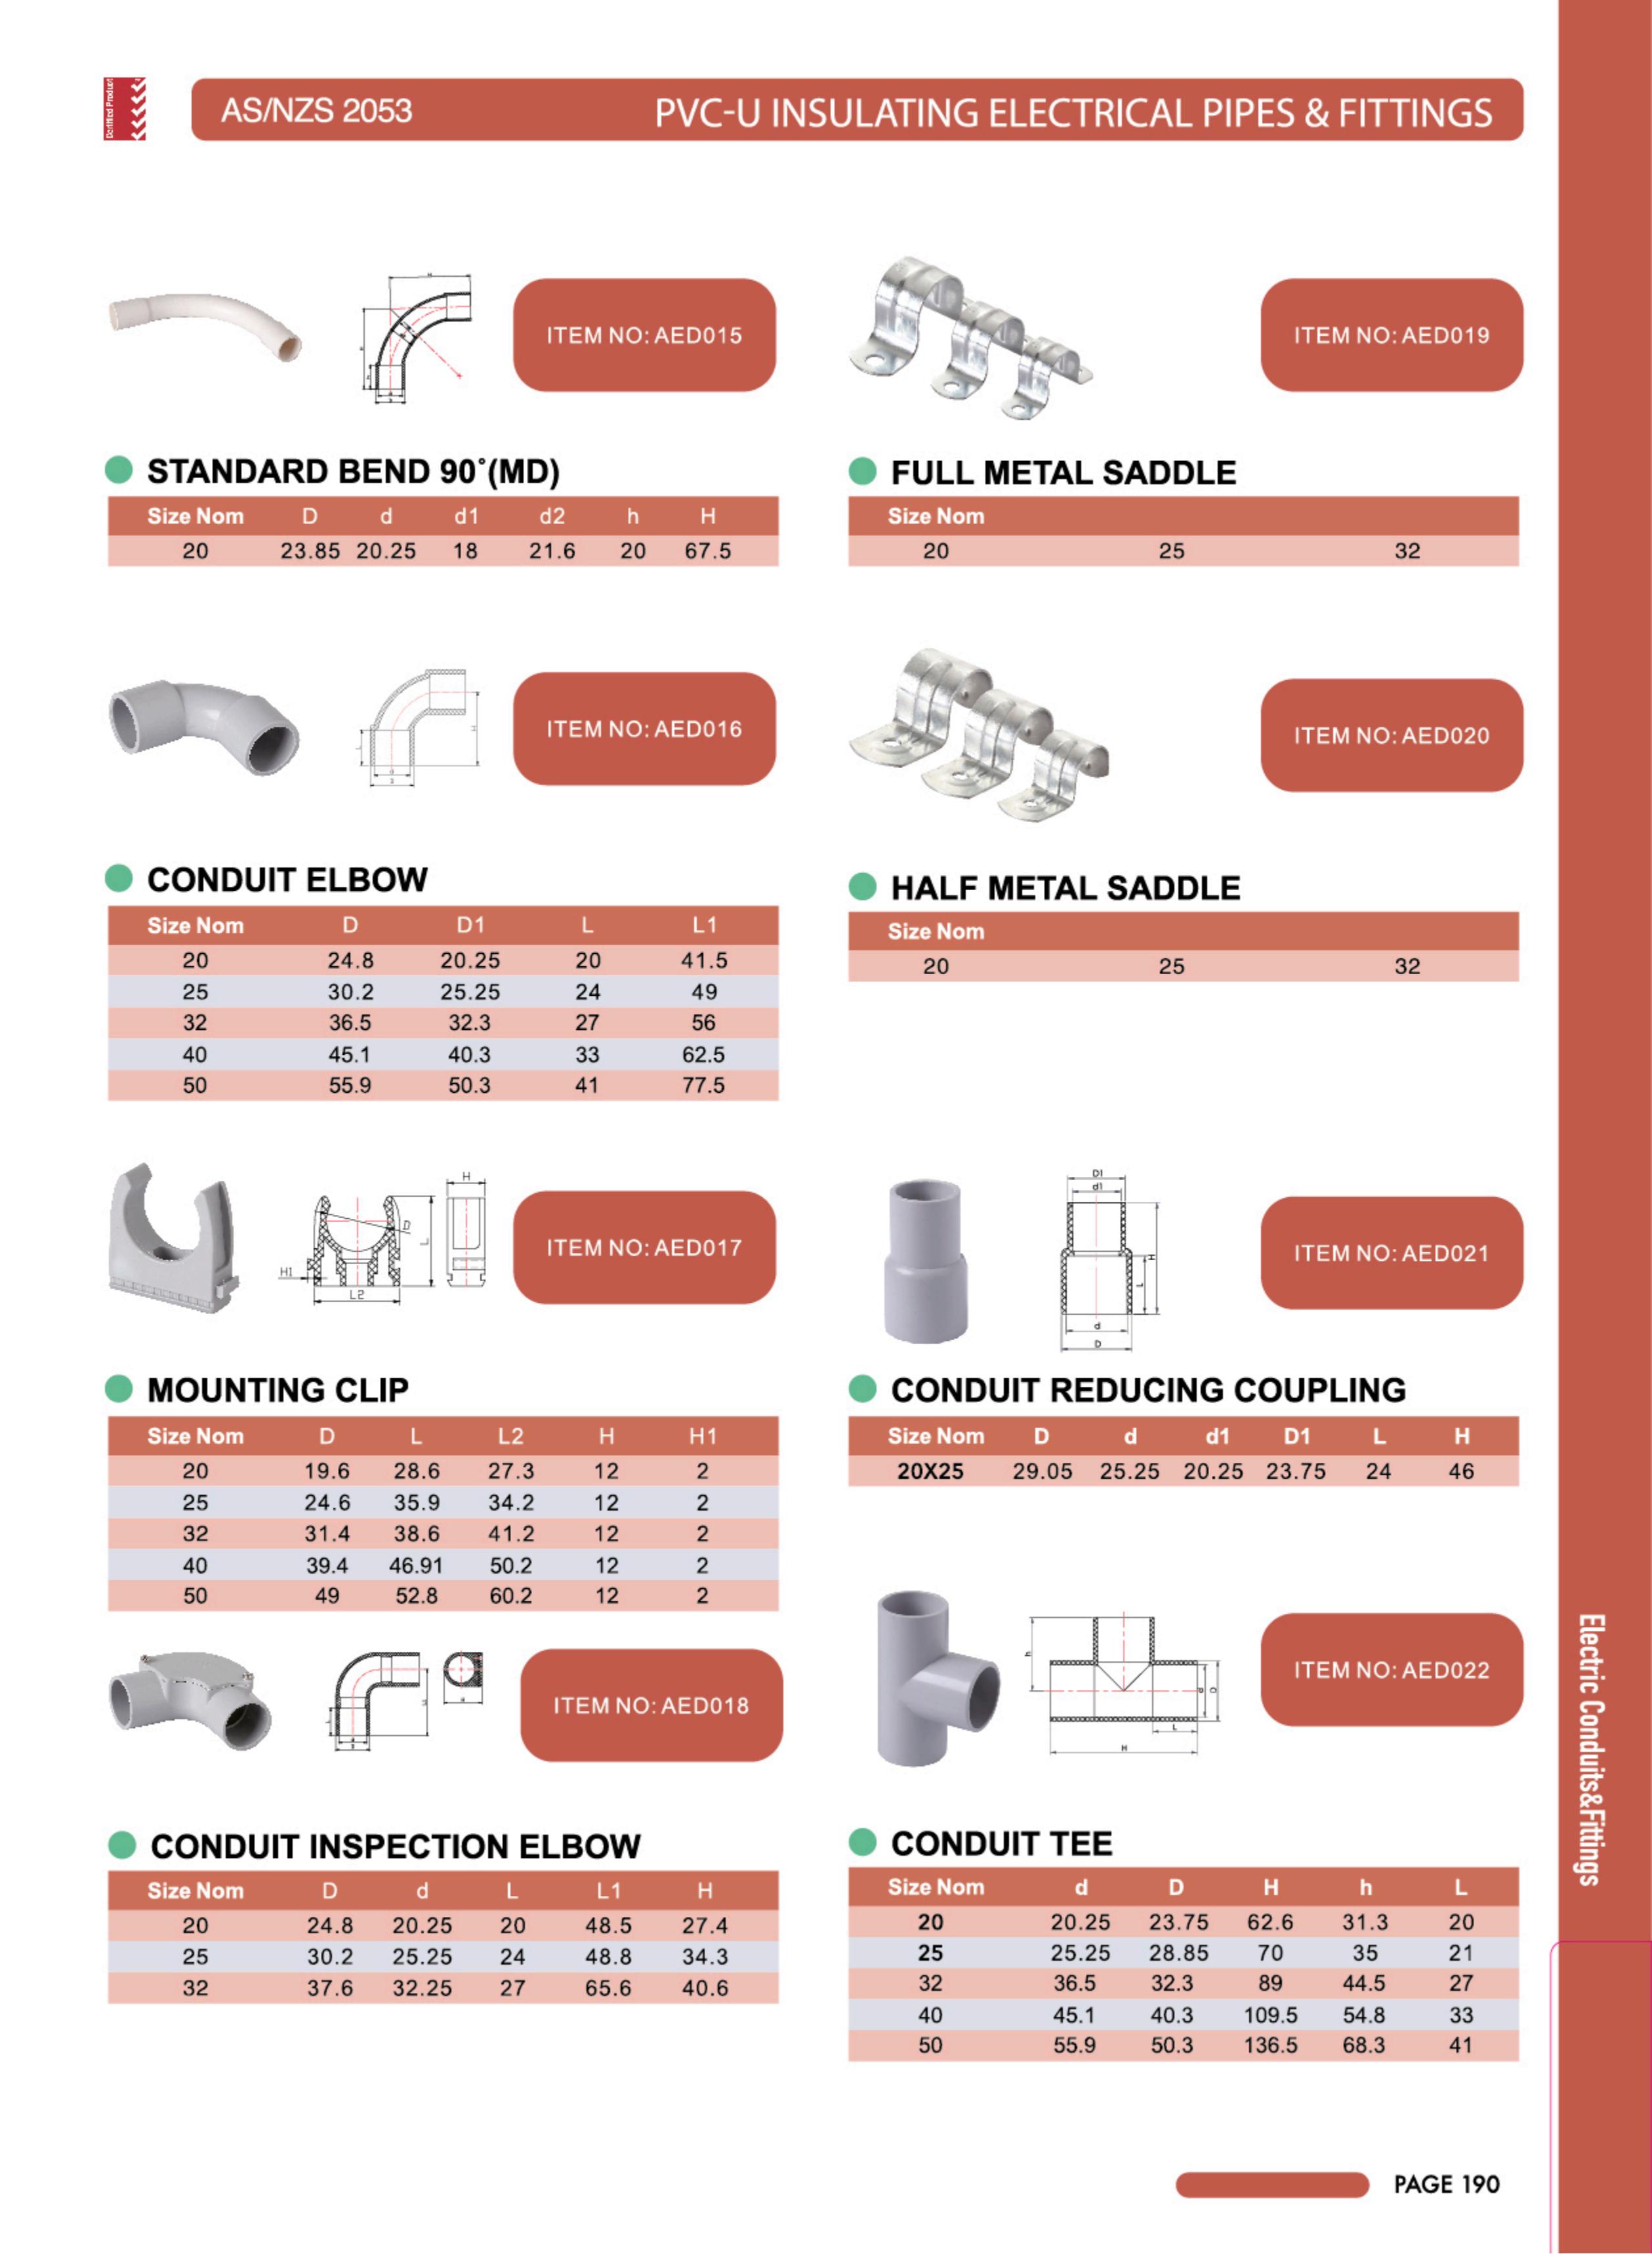 INSULATING ELECTRICAL CONDUITS AND FITTINGS 3